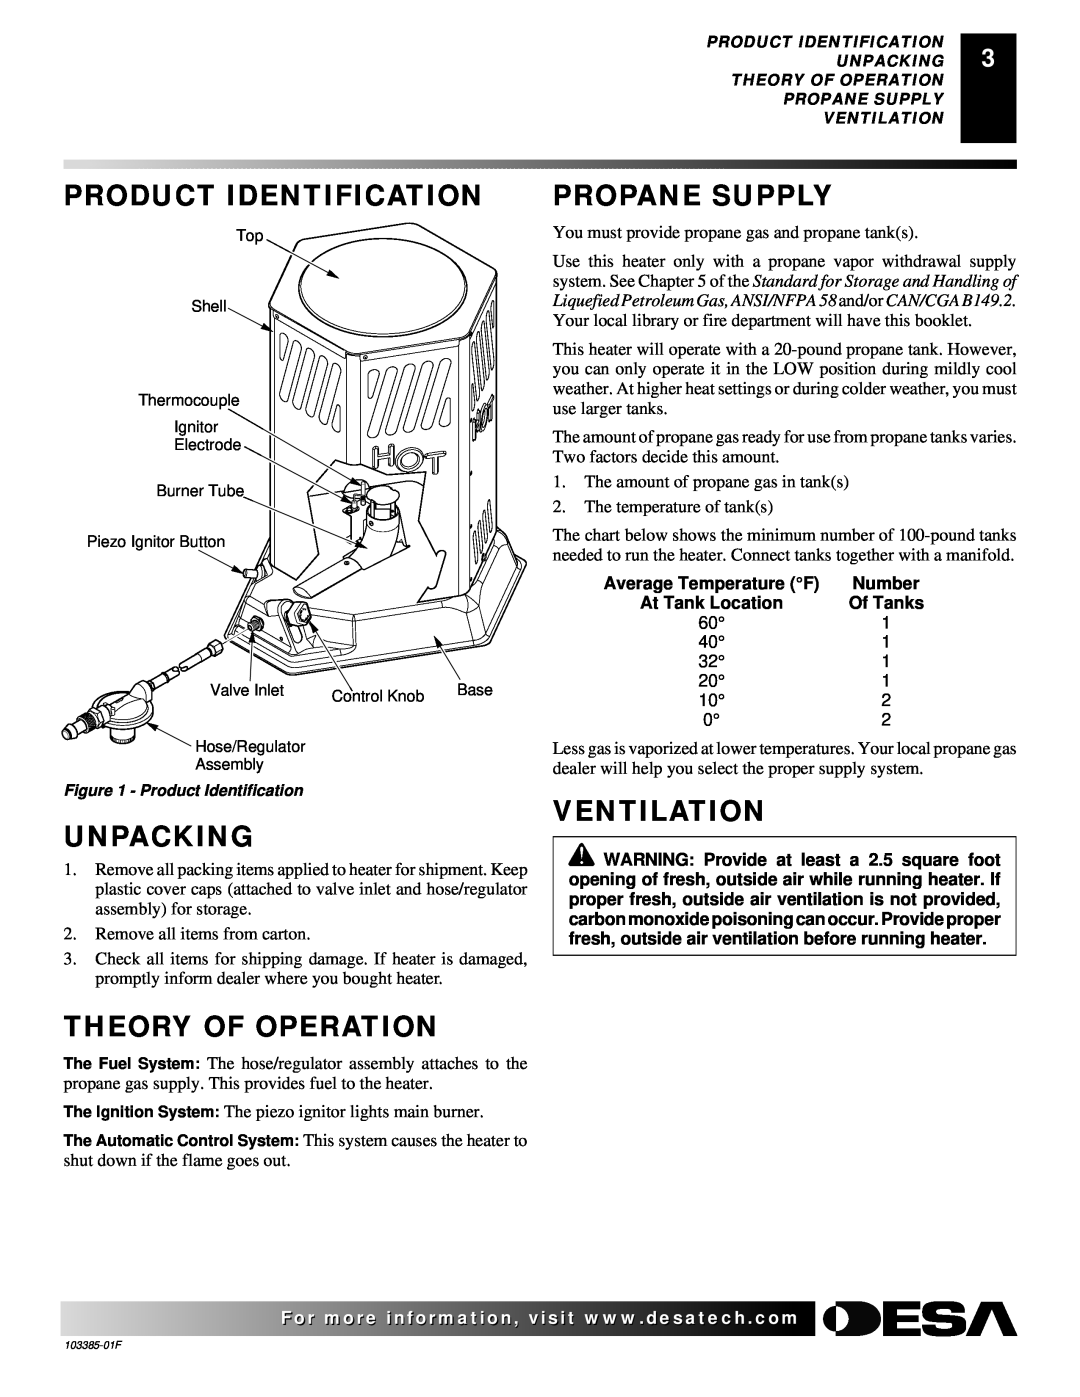 Desa 40, 80, 60 owner manual Product Identification, Unpacking, Theory Of Operation, Propane Supply, Ventilation 